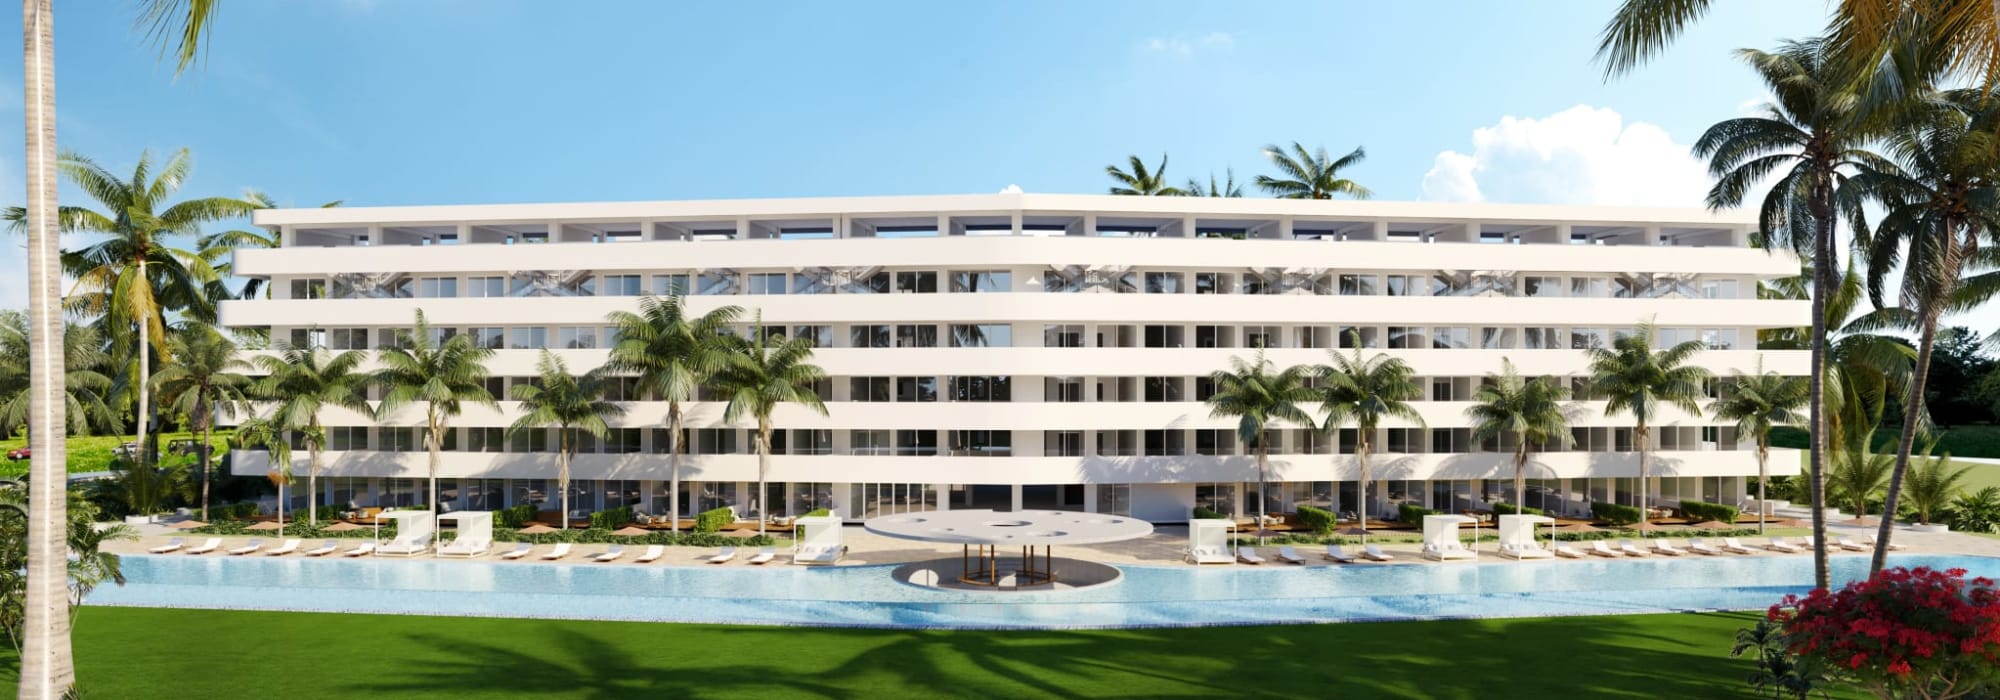 Apartments in Cana Bay